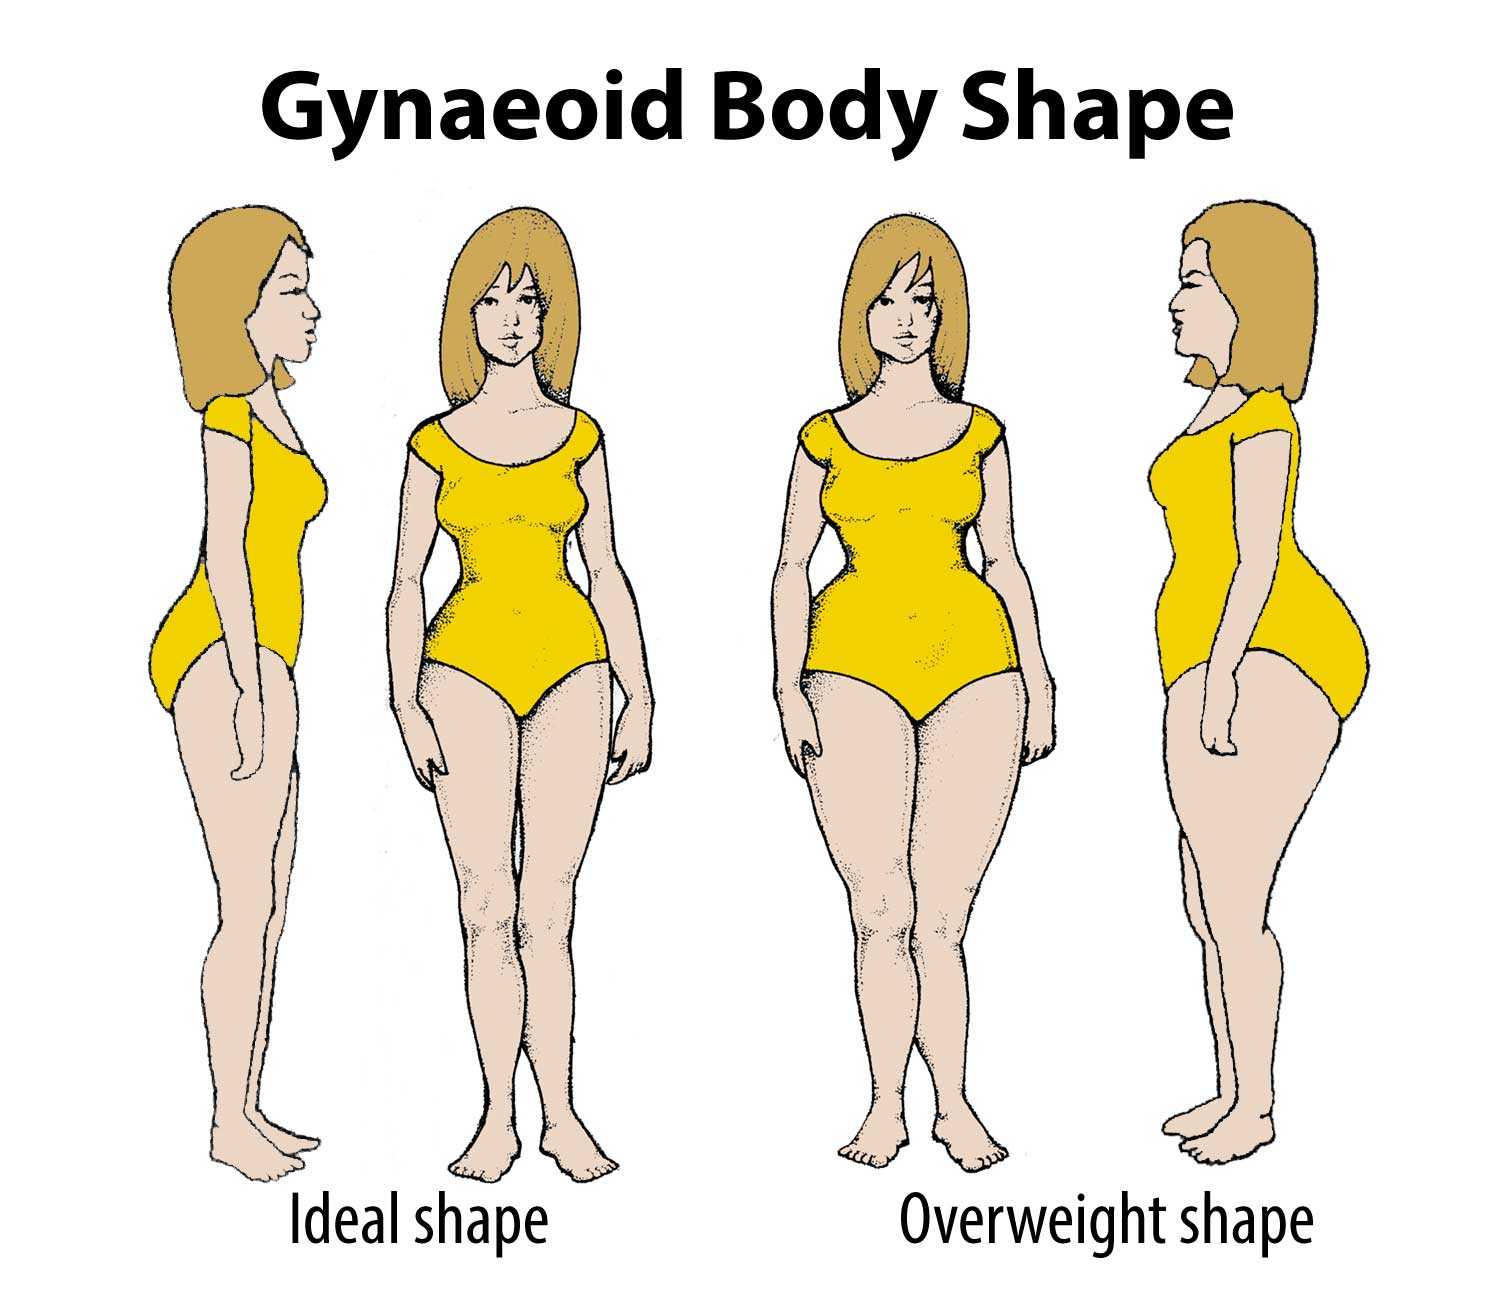 Your Body Type is